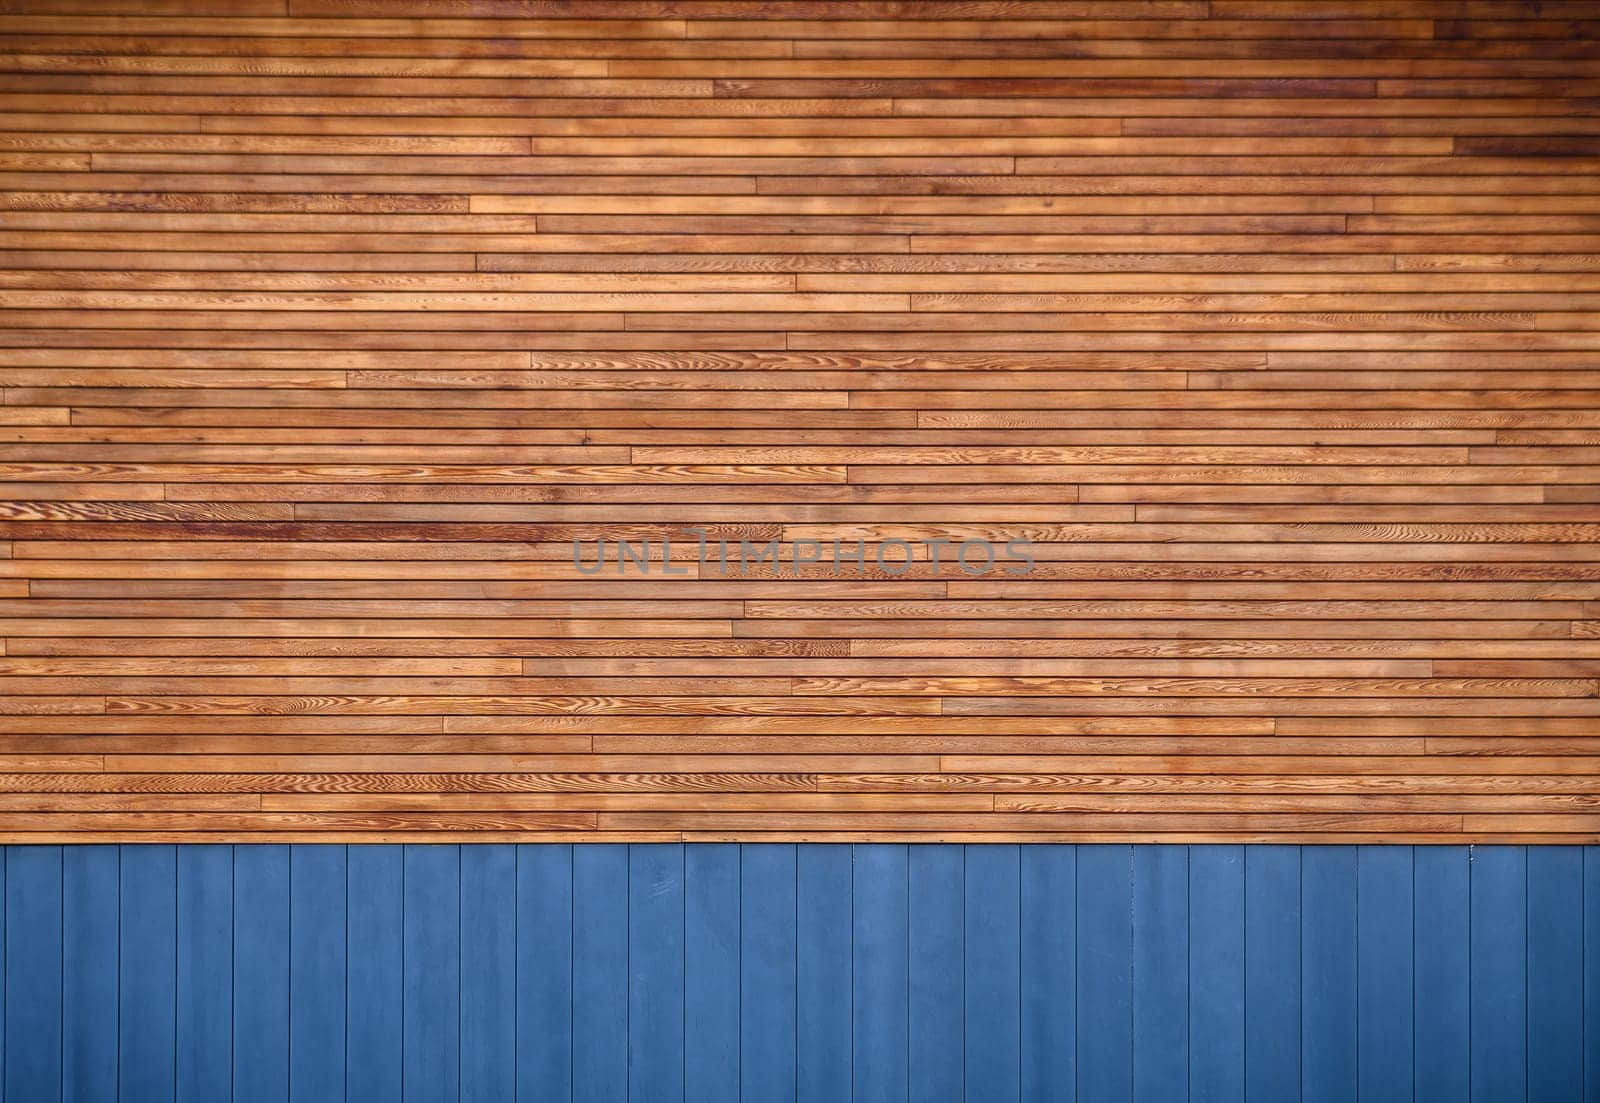 blue metal siding and wooden boards on the facade as a background by Mixa74